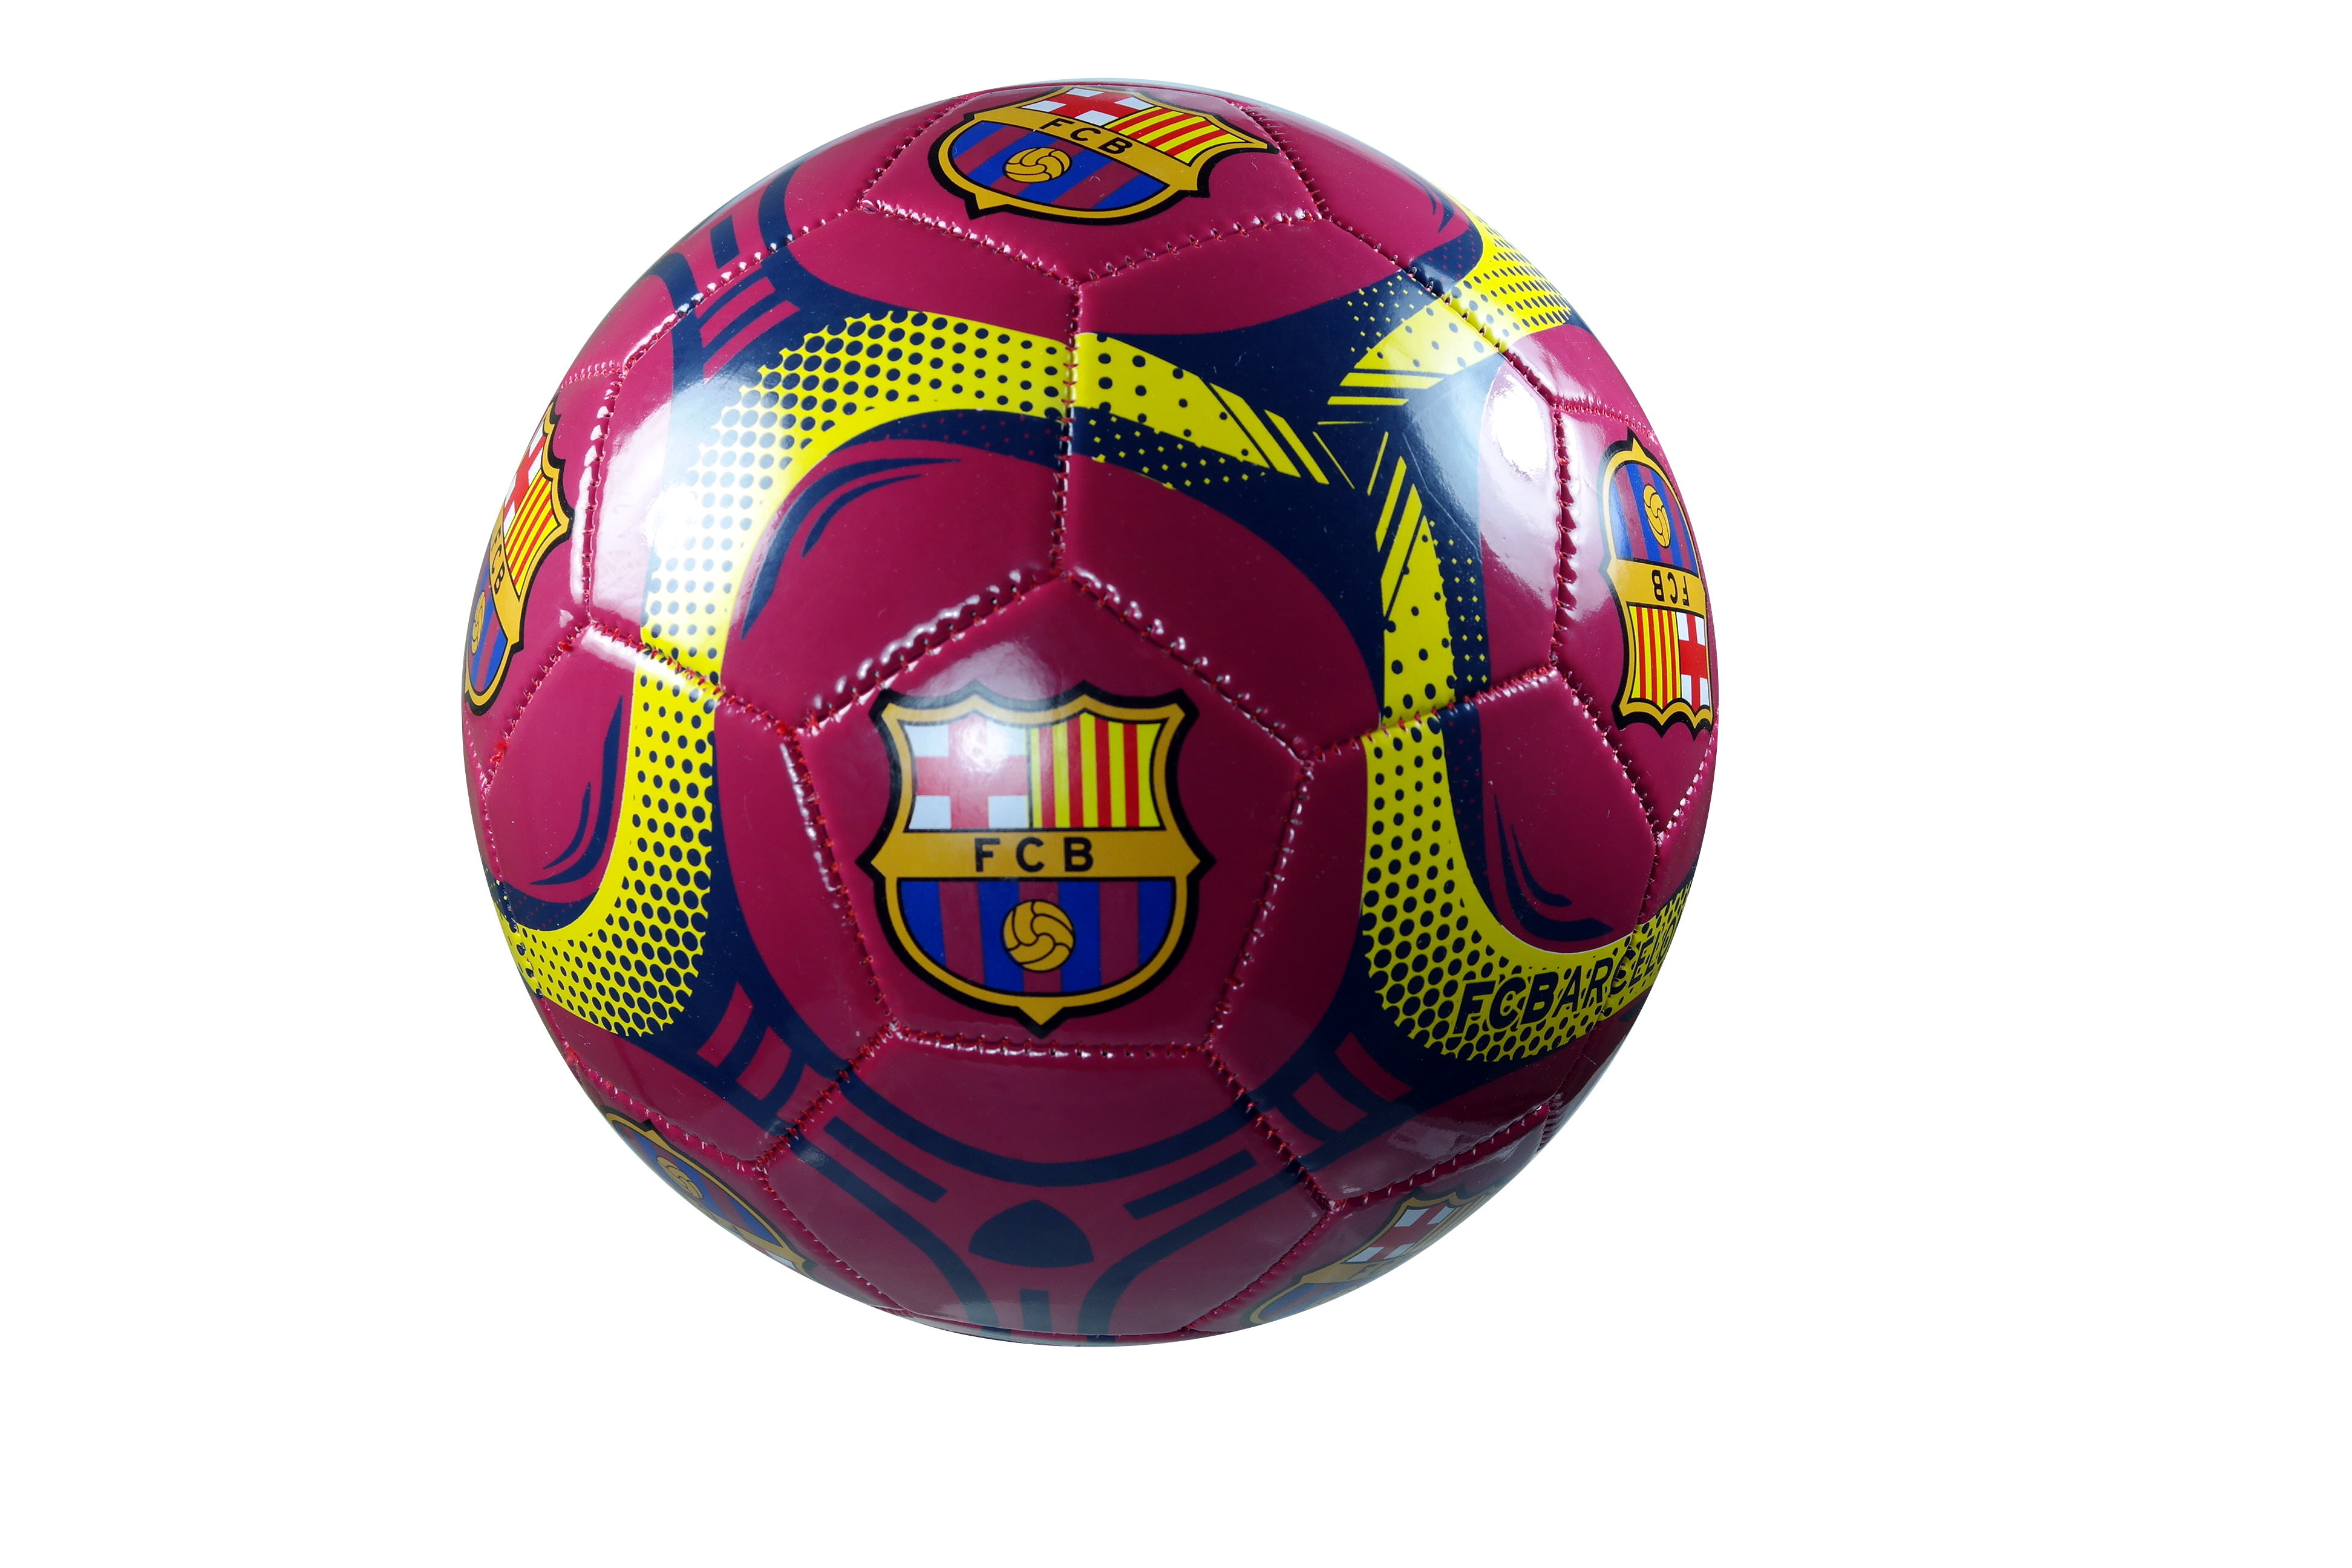 FC Barcelona Authentic Official Licensed Soccer Ball Size 5-07